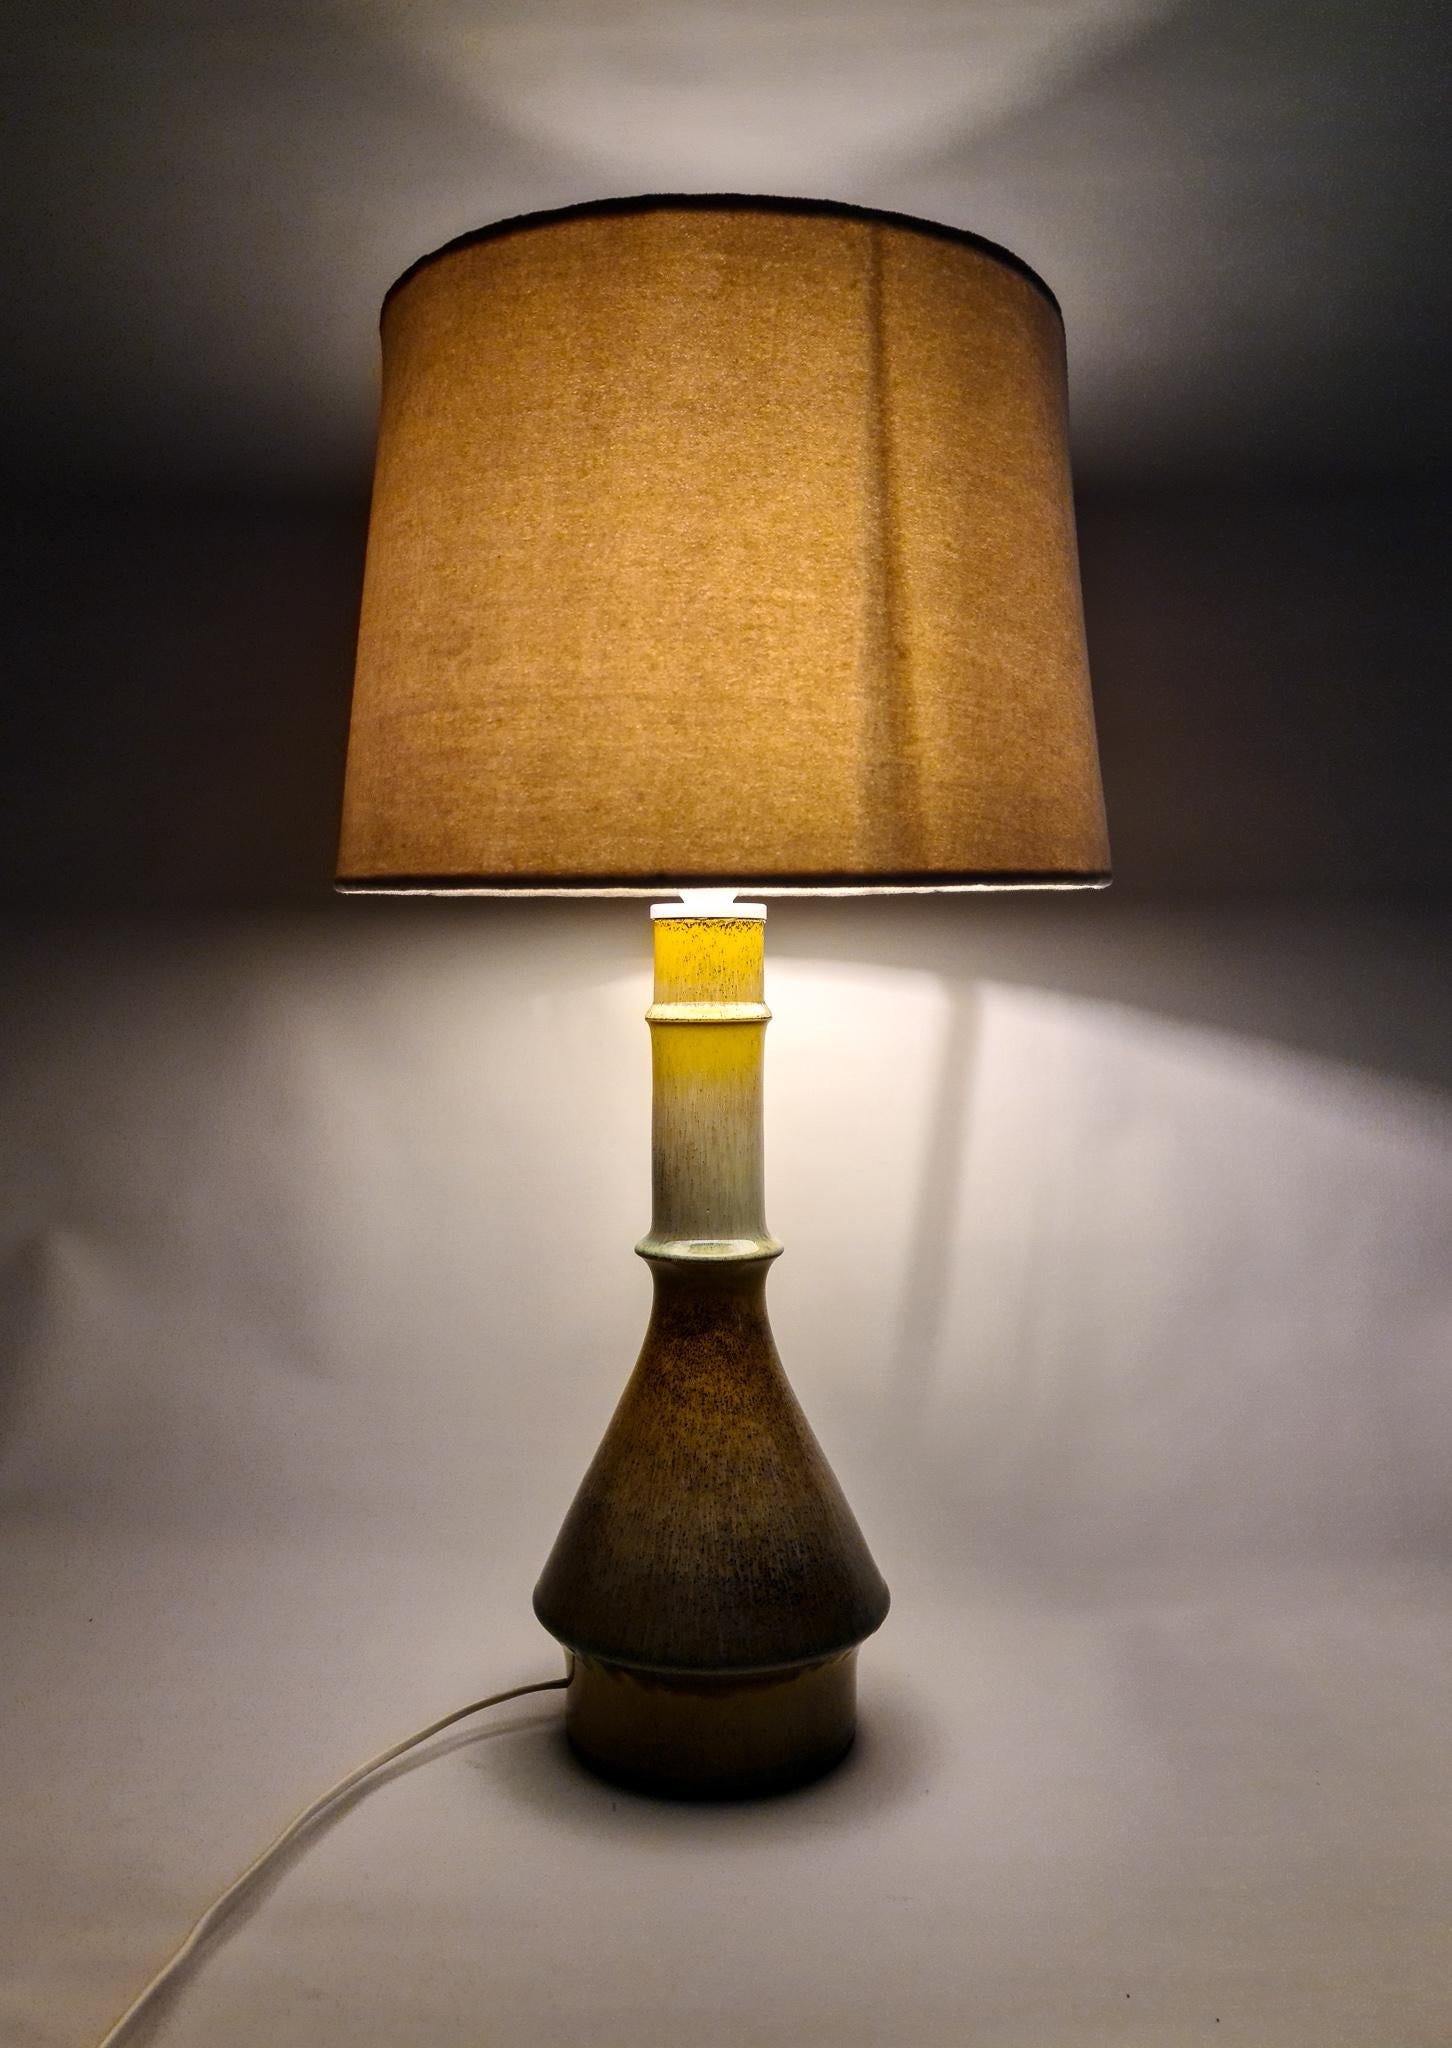 One of a kind large glazed ceramic table lamp by designer Carl Harry Stålhane and made in Sweden for Rörstrand in the 1950s.

The circular bottom comes together with the smaller top combined with a stunning glaze. Signed with a unique number.